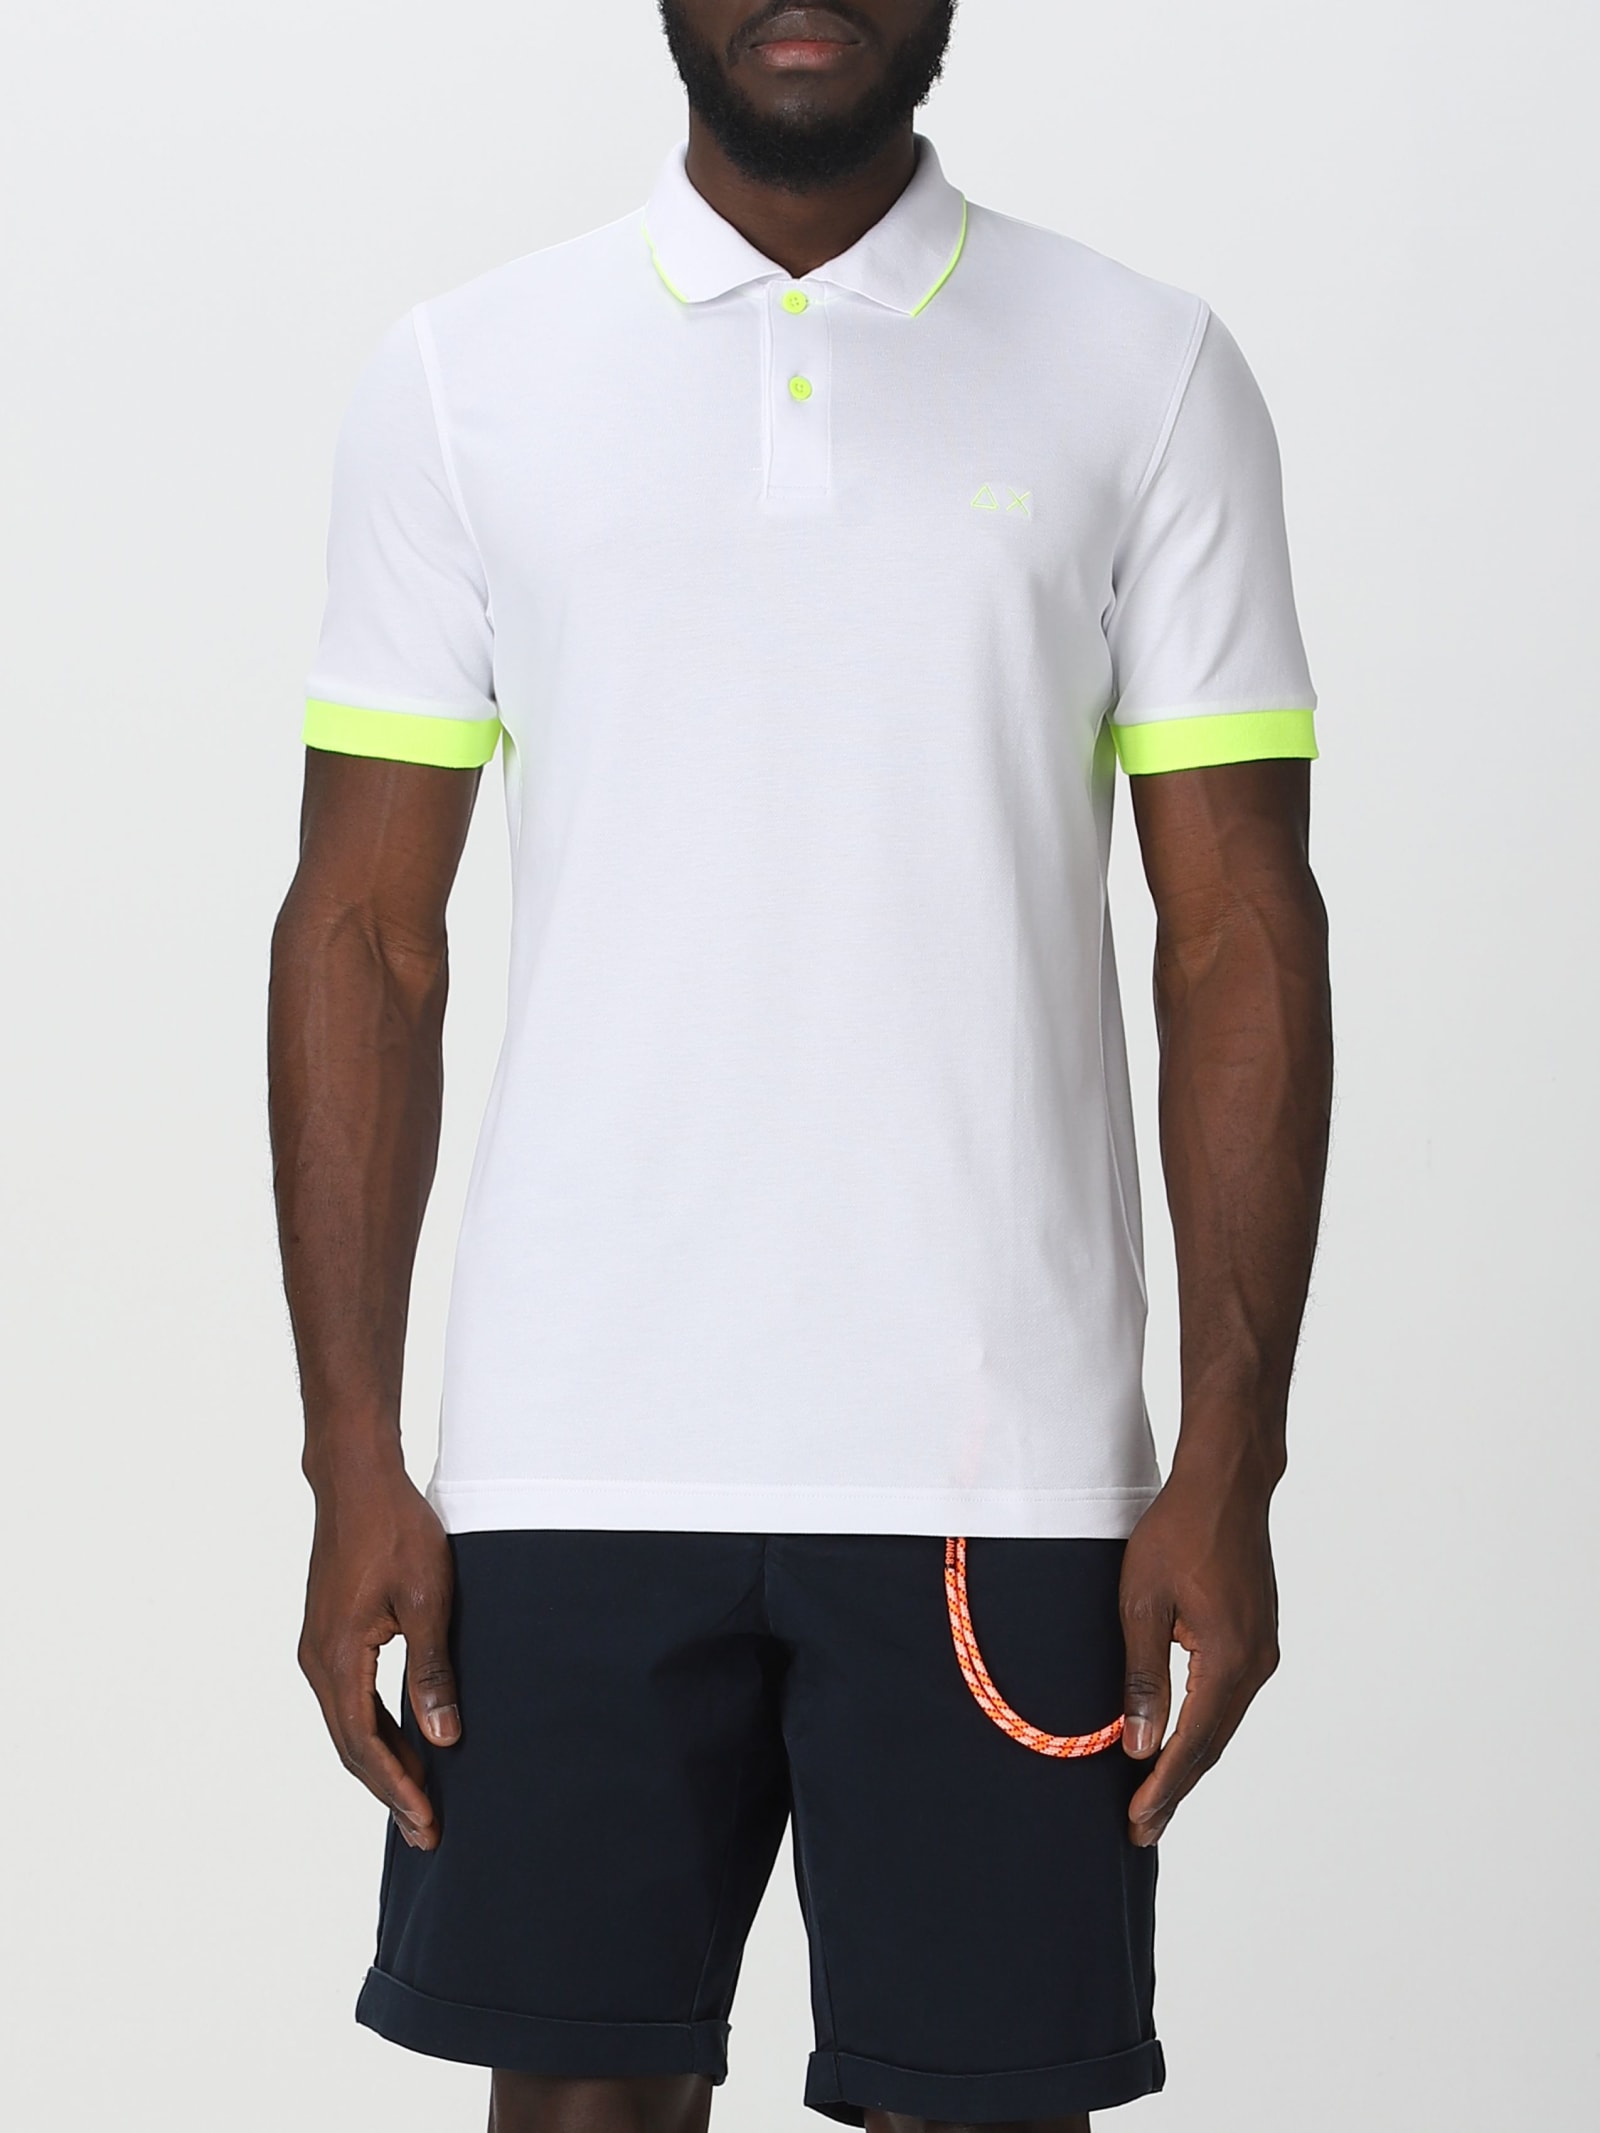 SUN 68 MOUSE TAIL POLO SHIRT AND FLUO SLEEVES